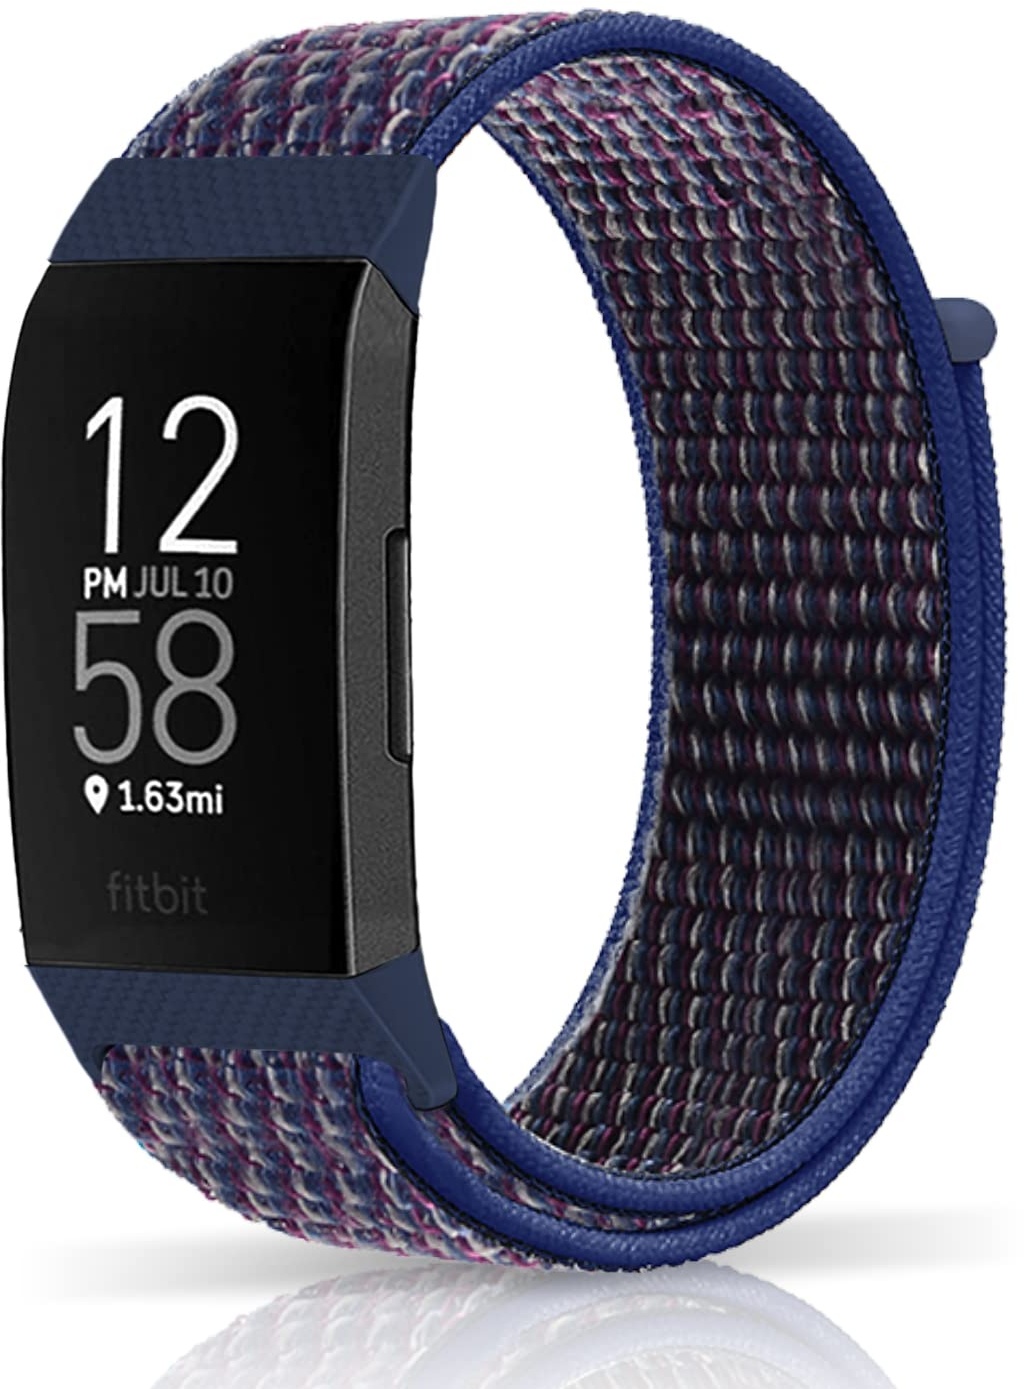 ZoRoll Armband für Fitbit Charge 4 / Fitbit Charge 3 / Fitbit Charge 3SE, Nylon Einstellbar Klettverschluss Ersatzarmband für Fitbit Charge 4 / Fitbit Charge 3 / Fitbit Charge 3SE - Lila